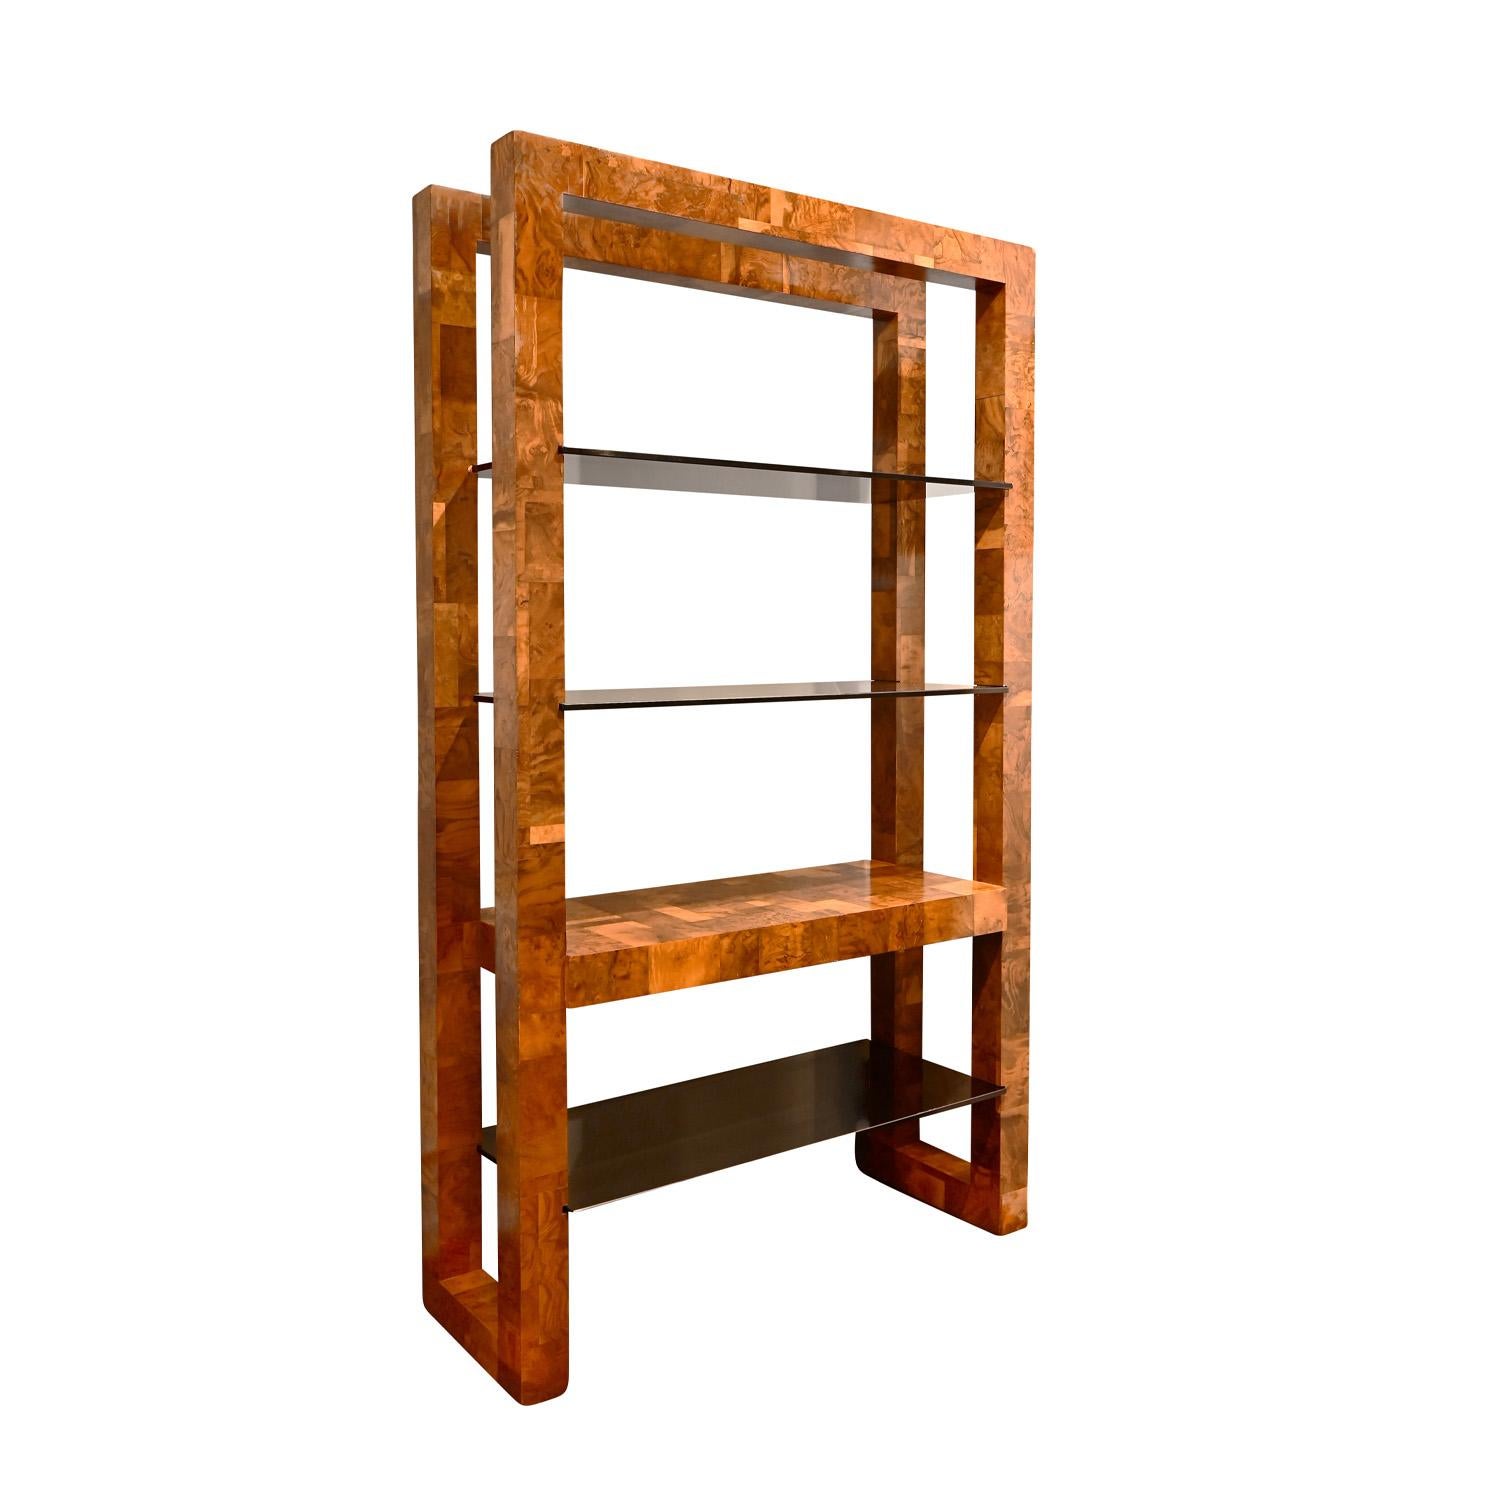 Mid-Century Modern Paul Evans Large Etagere in Walnut Burl with Glass Shelves 1973 (Signed)